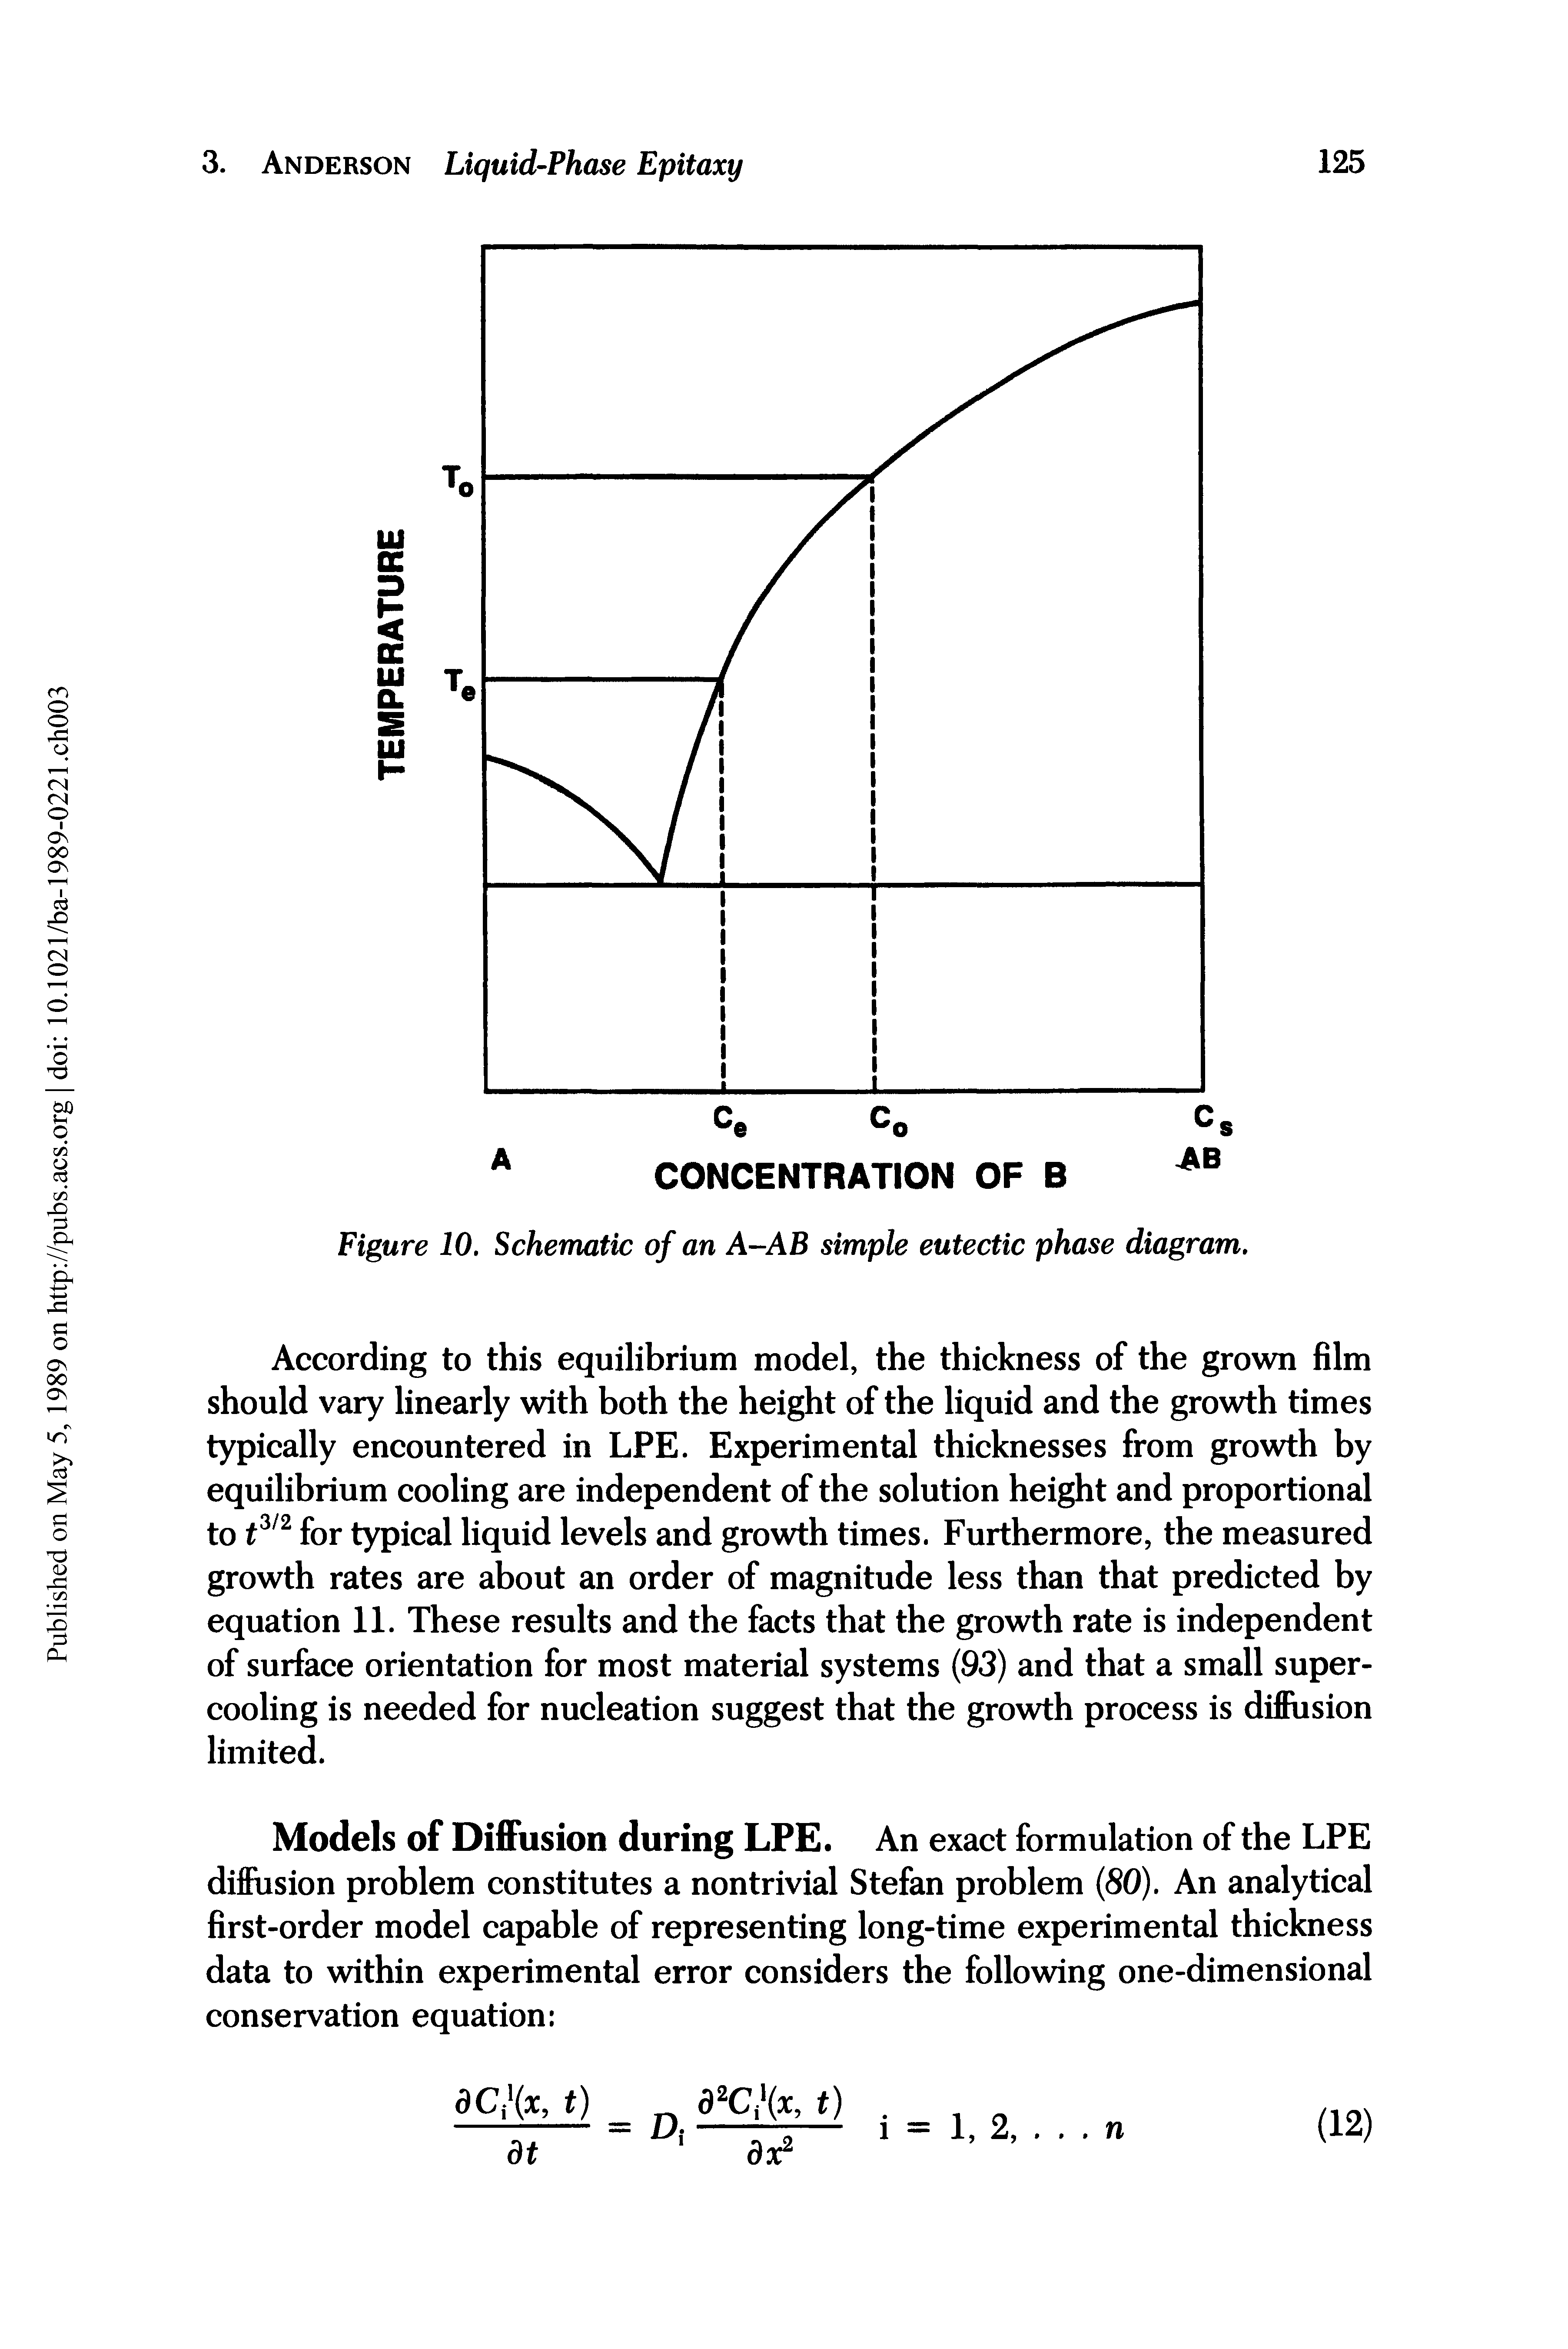 Figure 10. Schematic of an A-AB simple eutectic phase diagram.